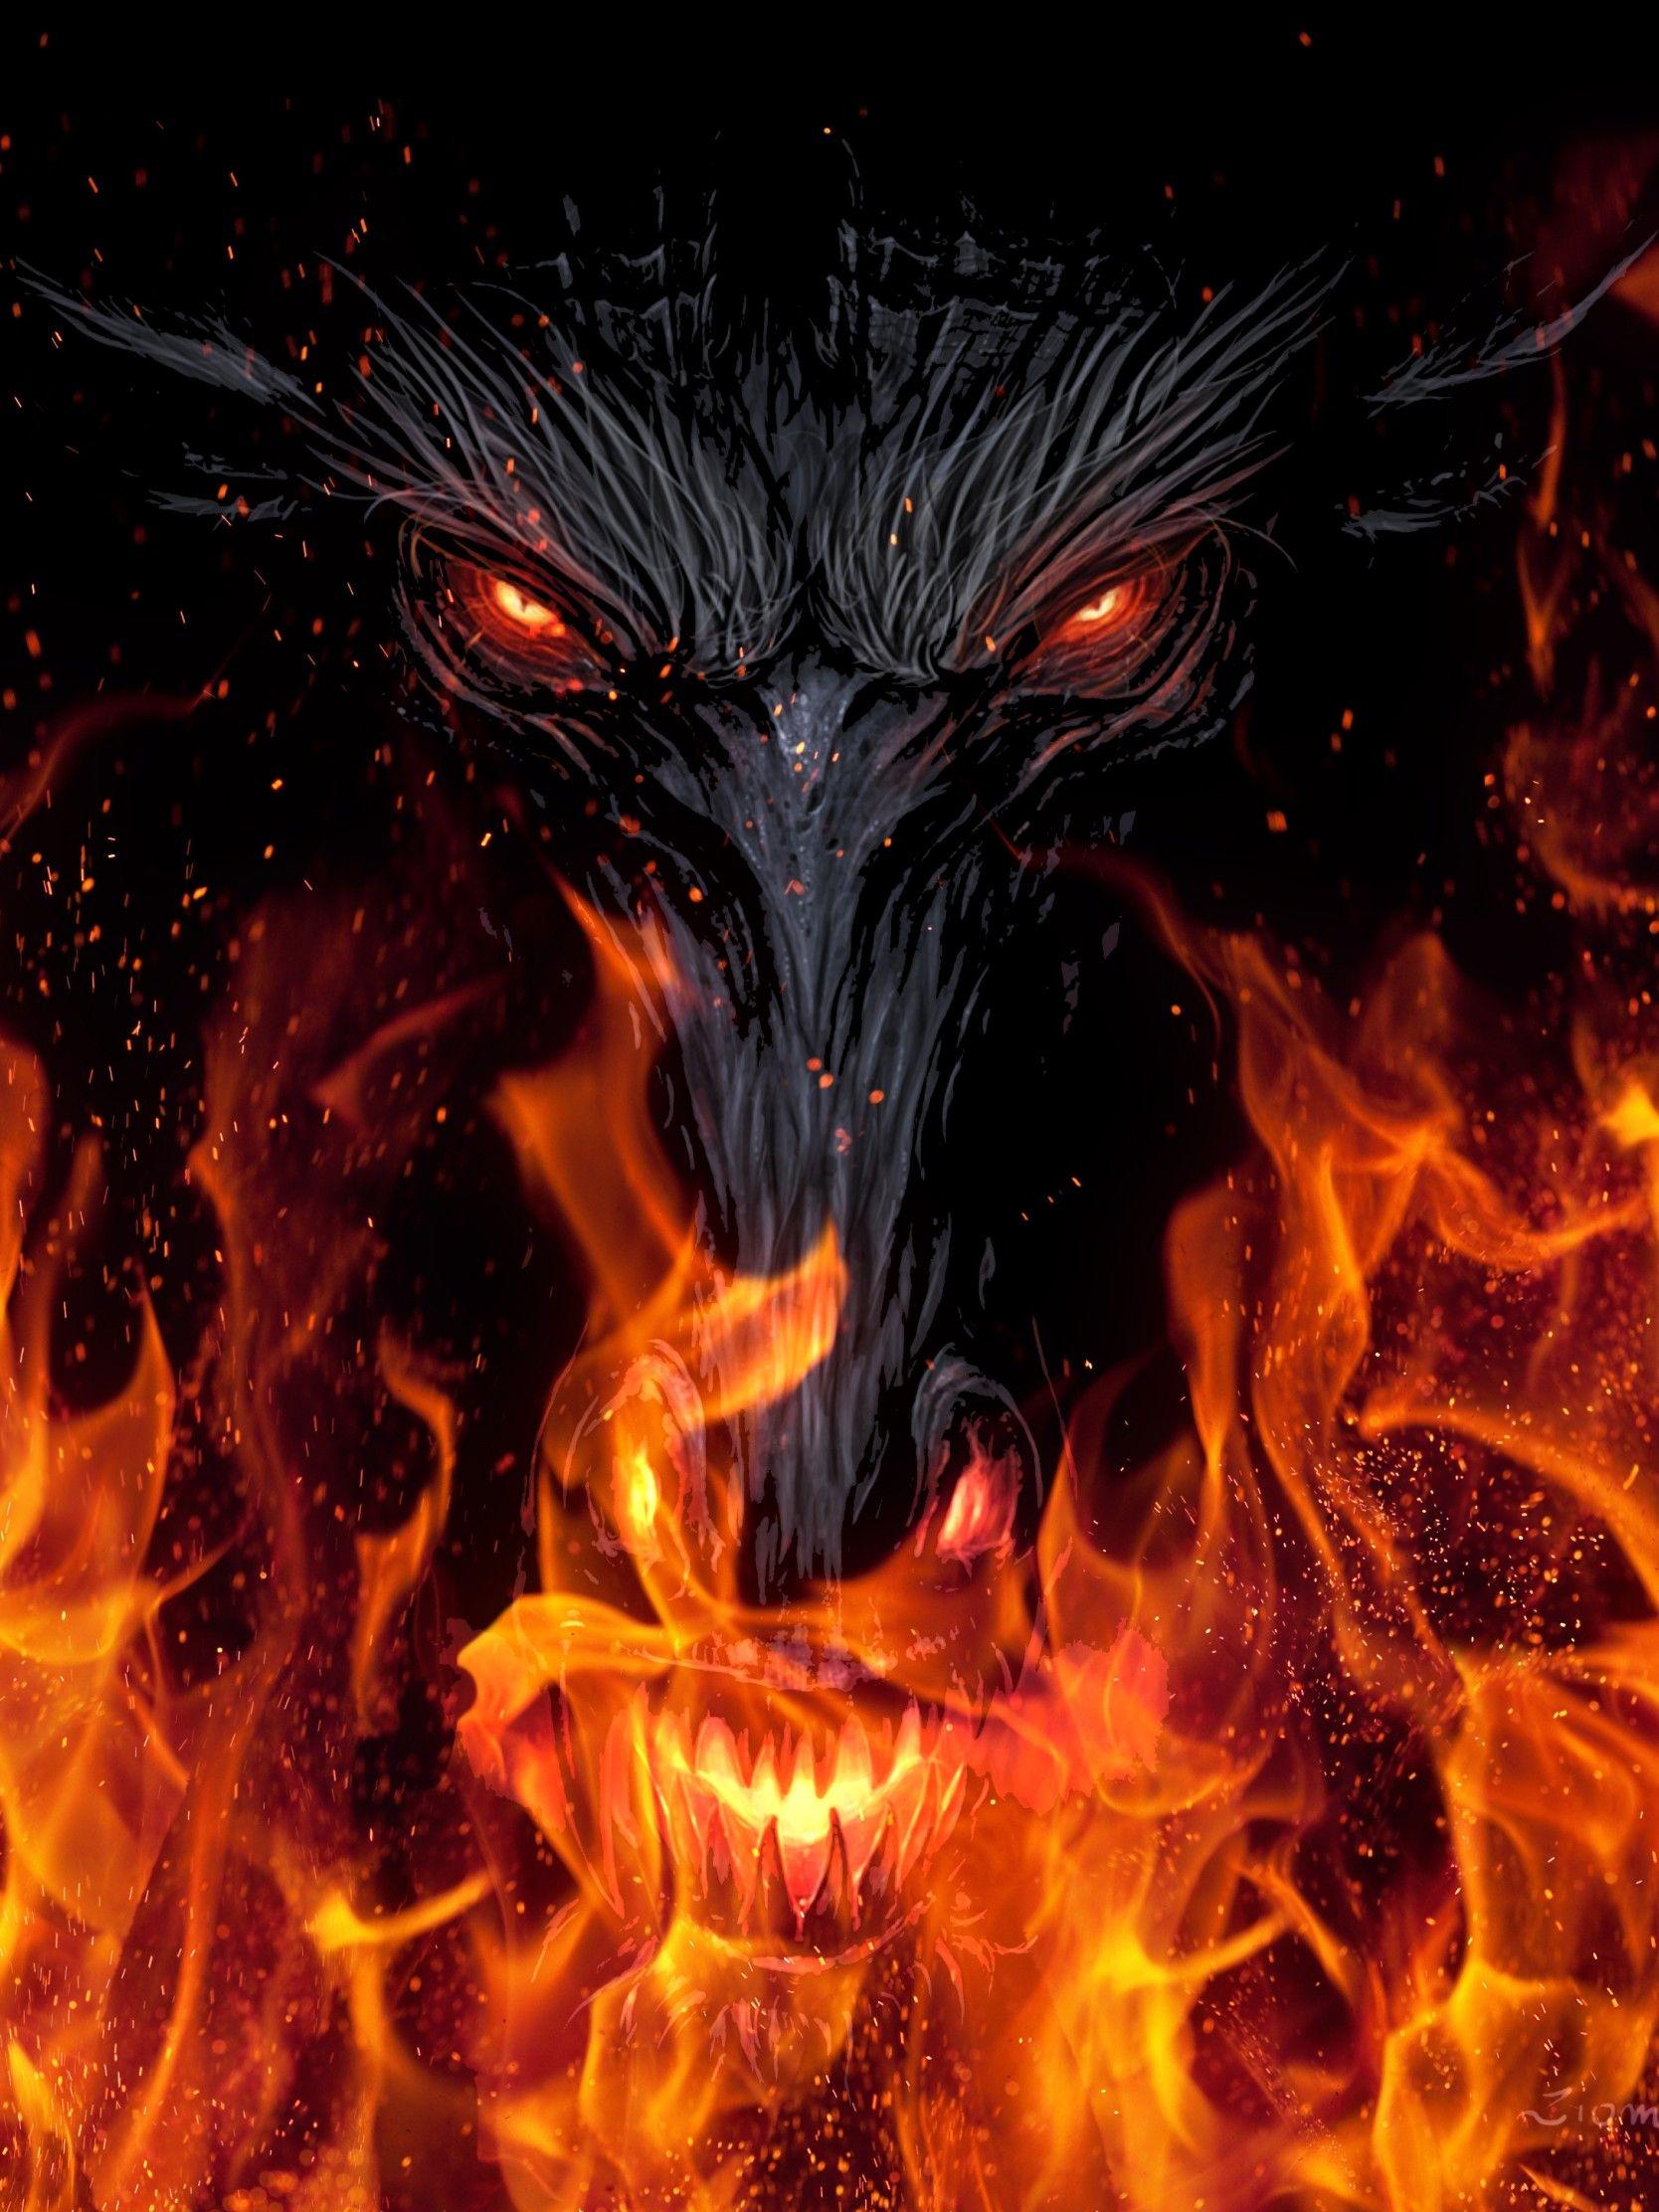 Download Wallpaper 1668x2224 Dragon, Fire, Black, Angry, Red eyes